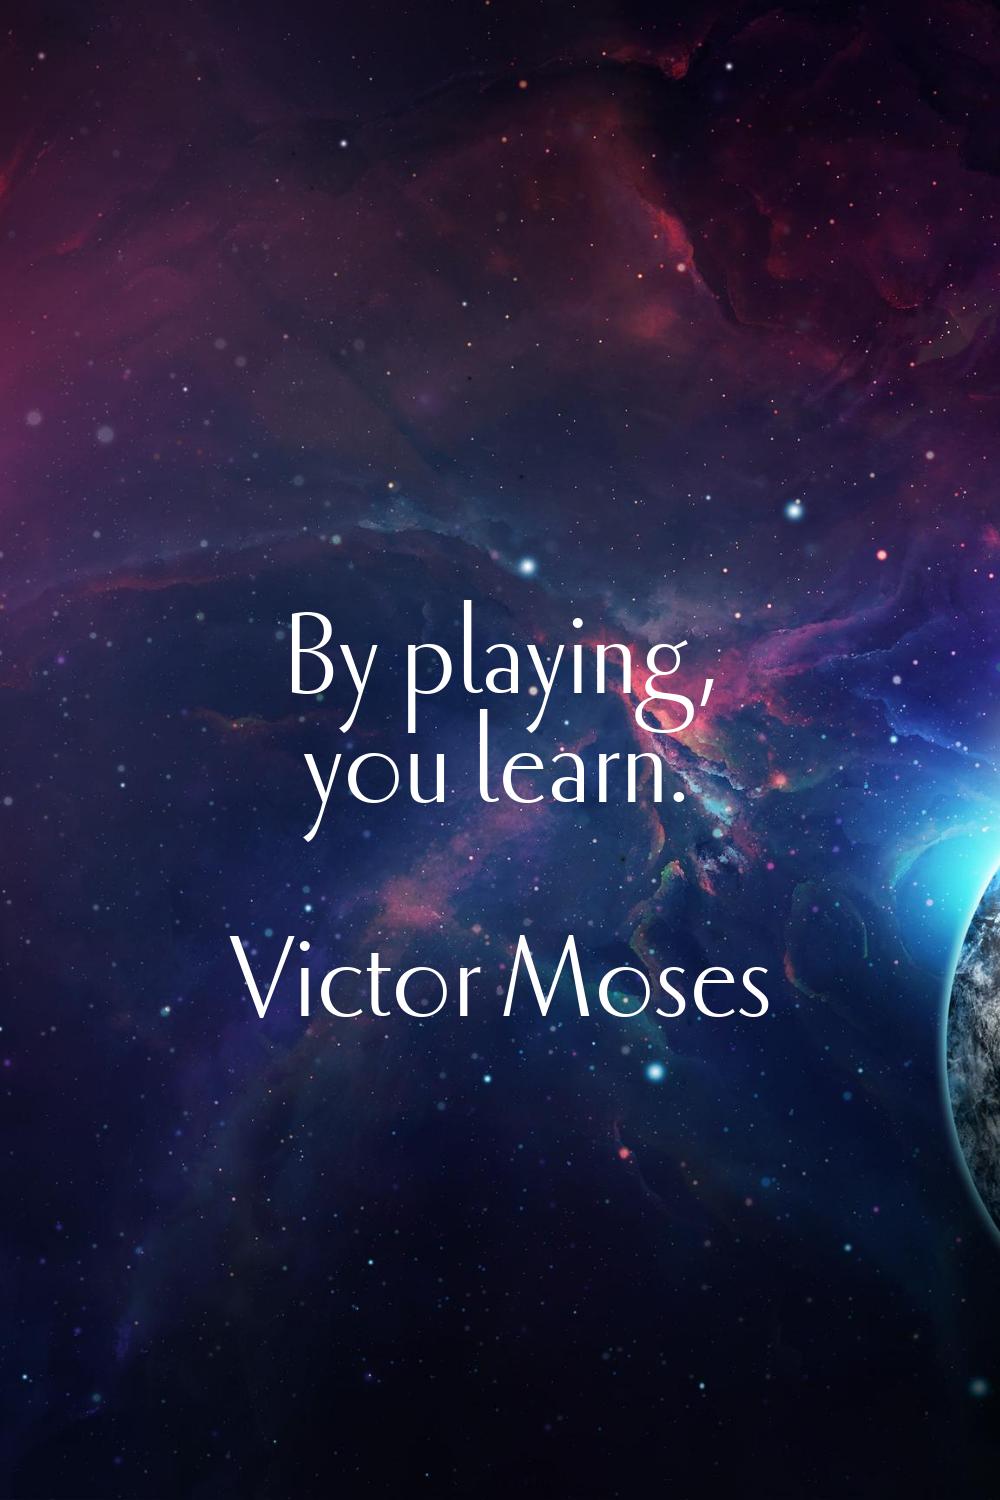 By playing, you learn.